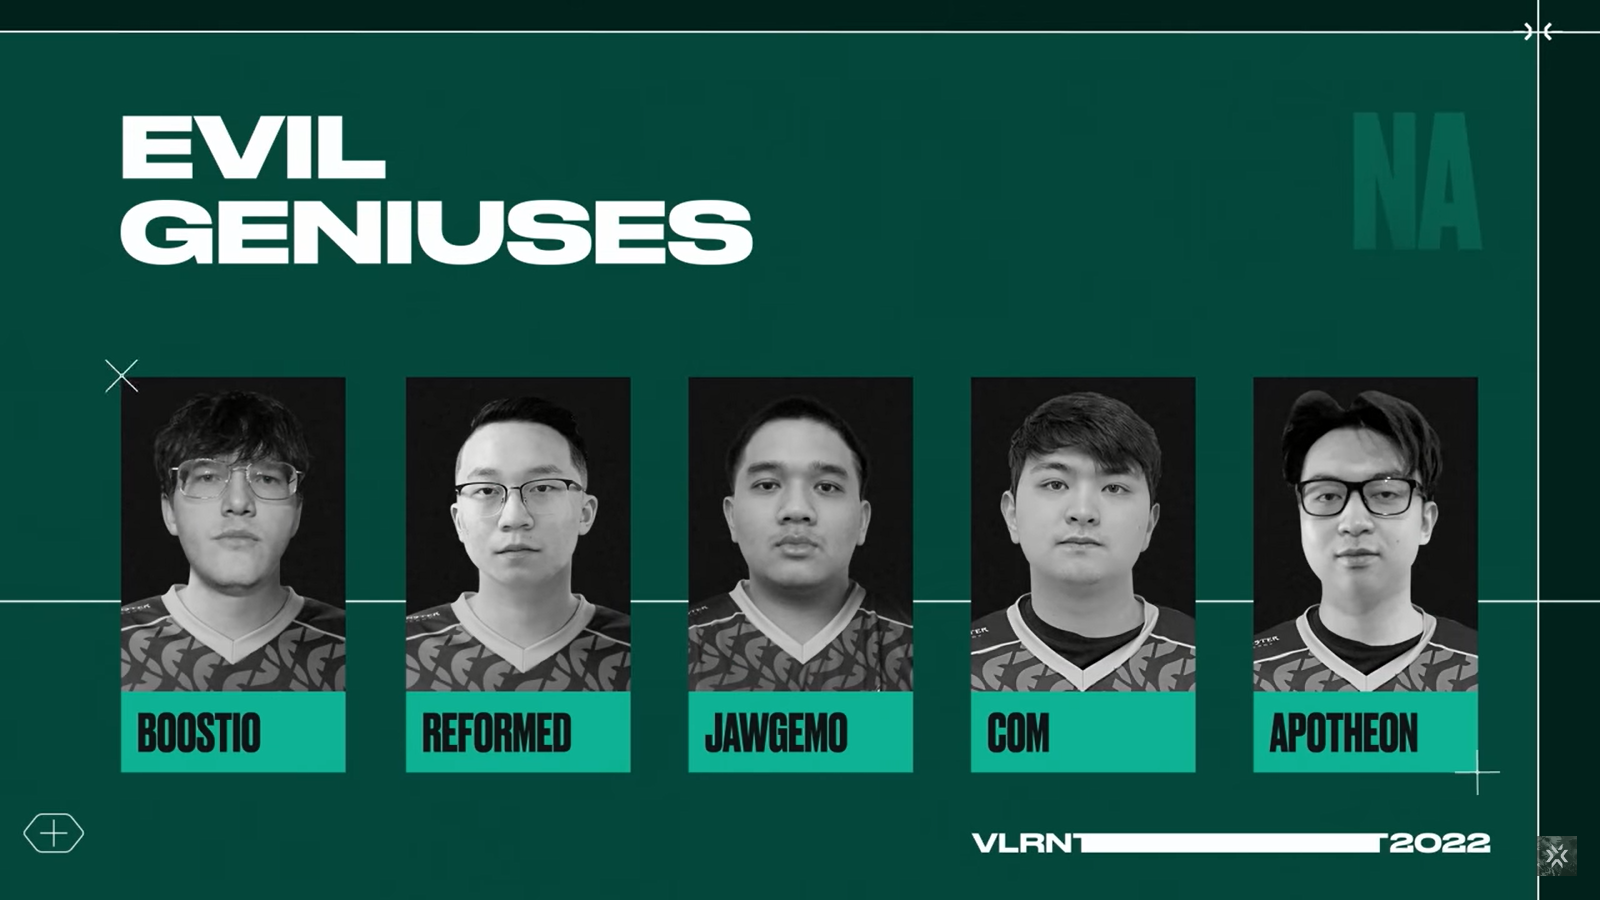 The Roster for Evil Geniuses during Challengers 2